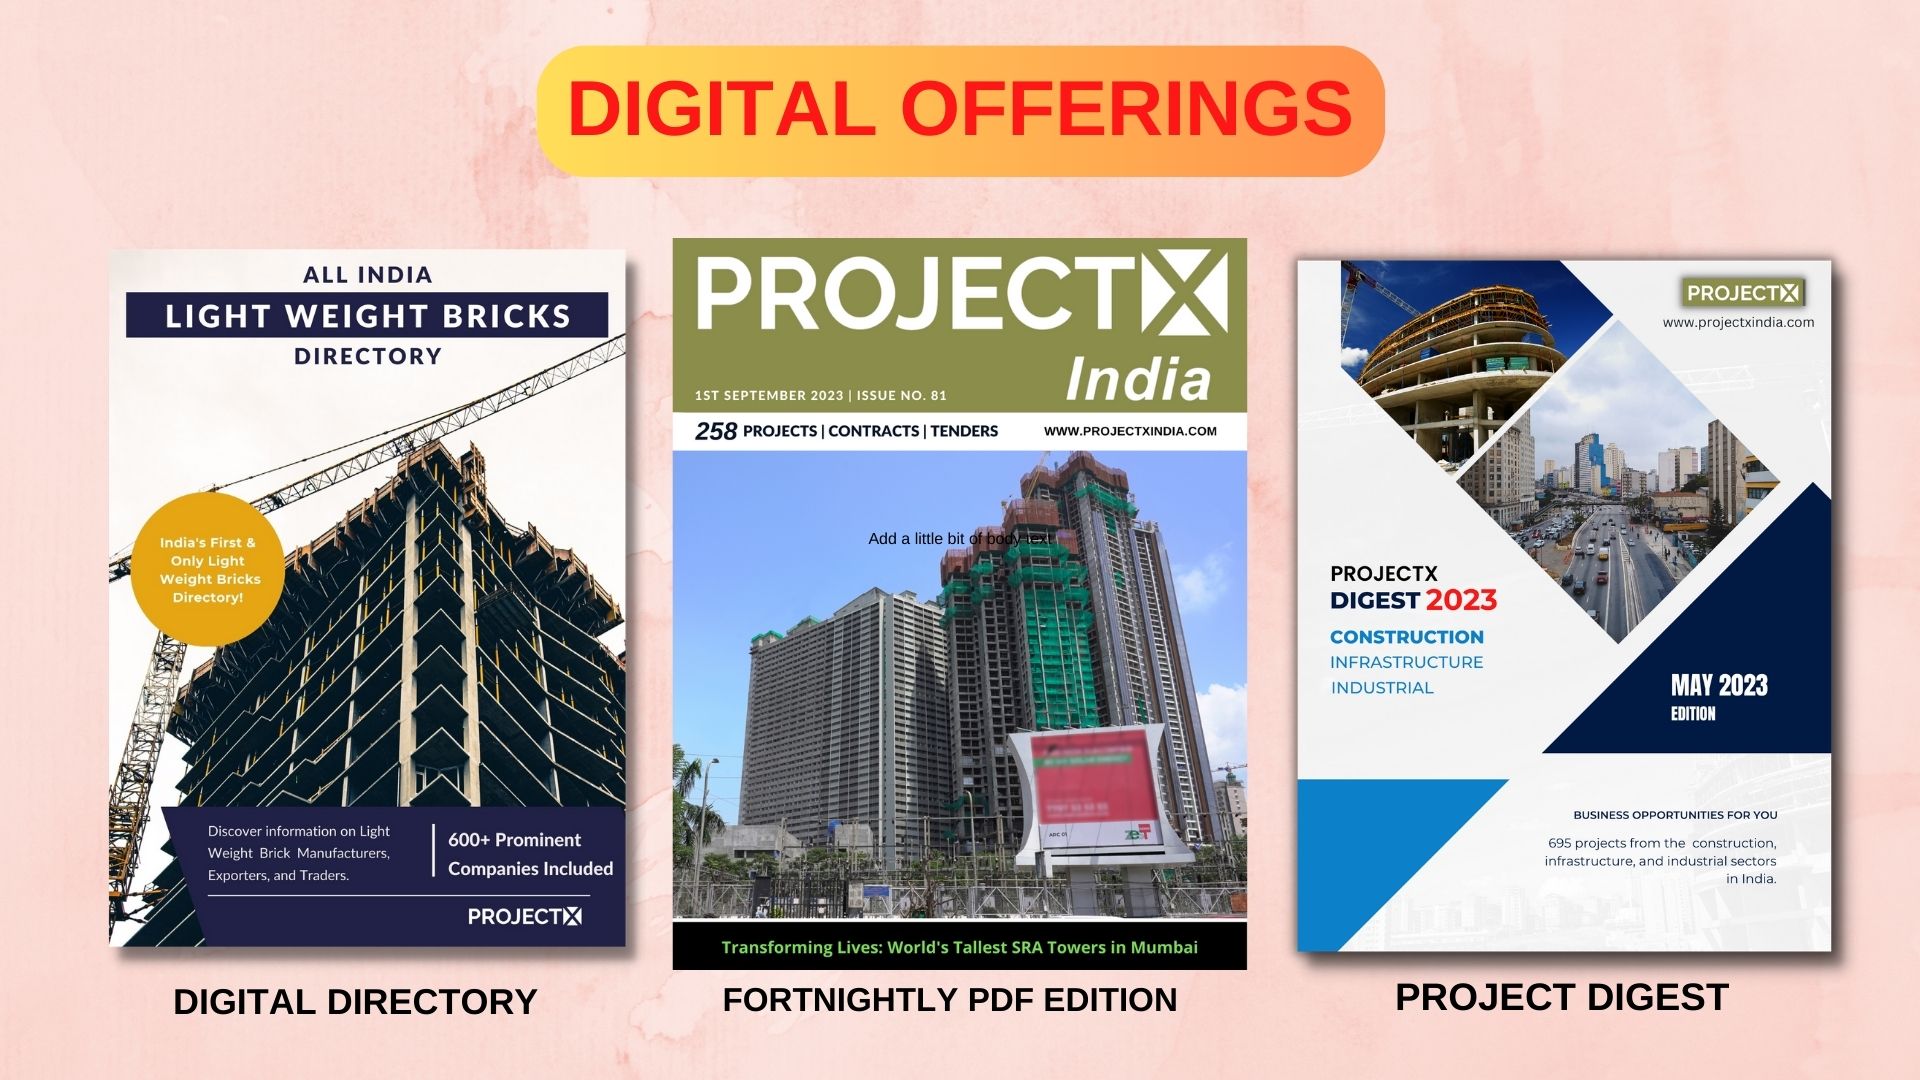 https://projectxindia.com/2023/06/20/projectx-the-go-to-source-for-information-on-indian-projects/